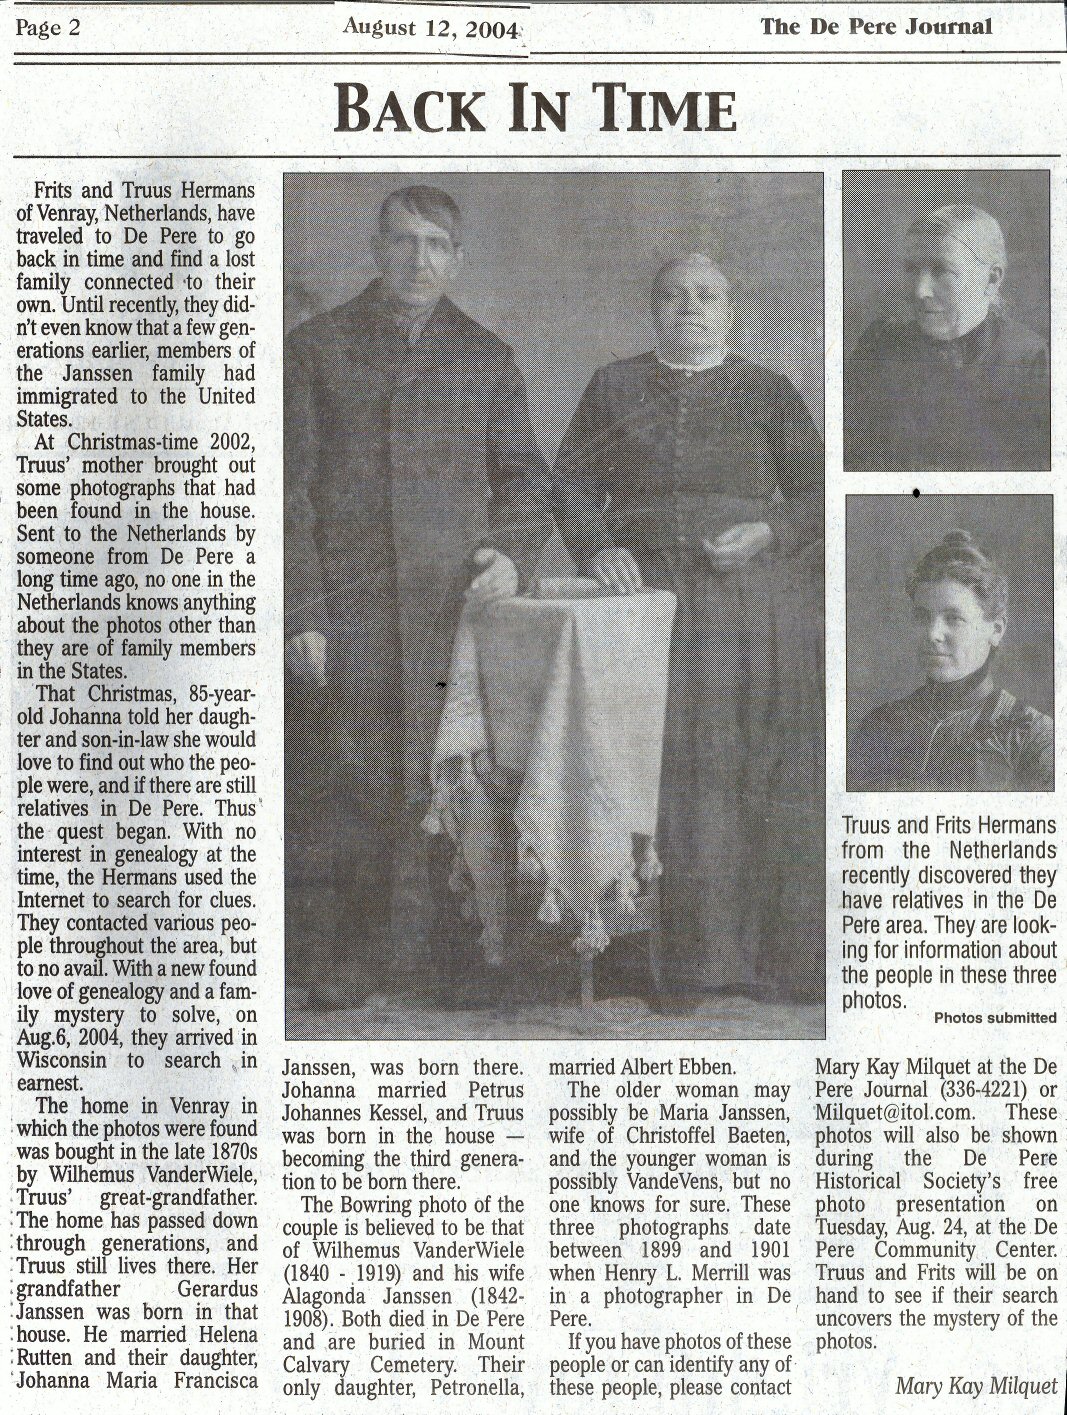 Newspaper article that appeared August 12, 2004